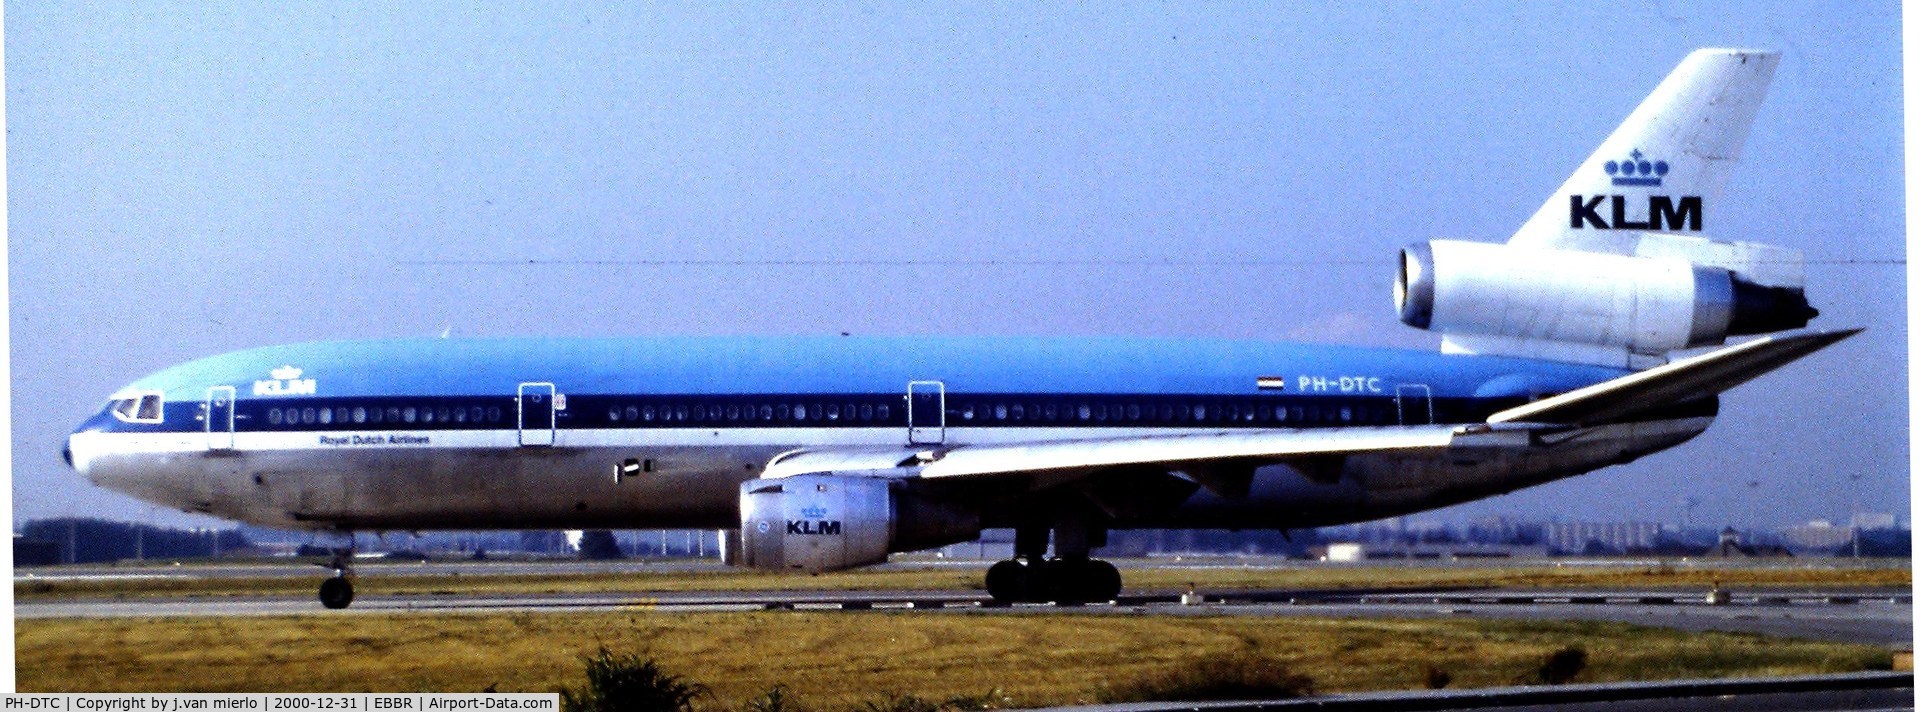 PH-DTC, 1972 Douglas DC-10-30 C/N 46552, Leaving BRUCARGO after diversion from AMS EBBR'80s